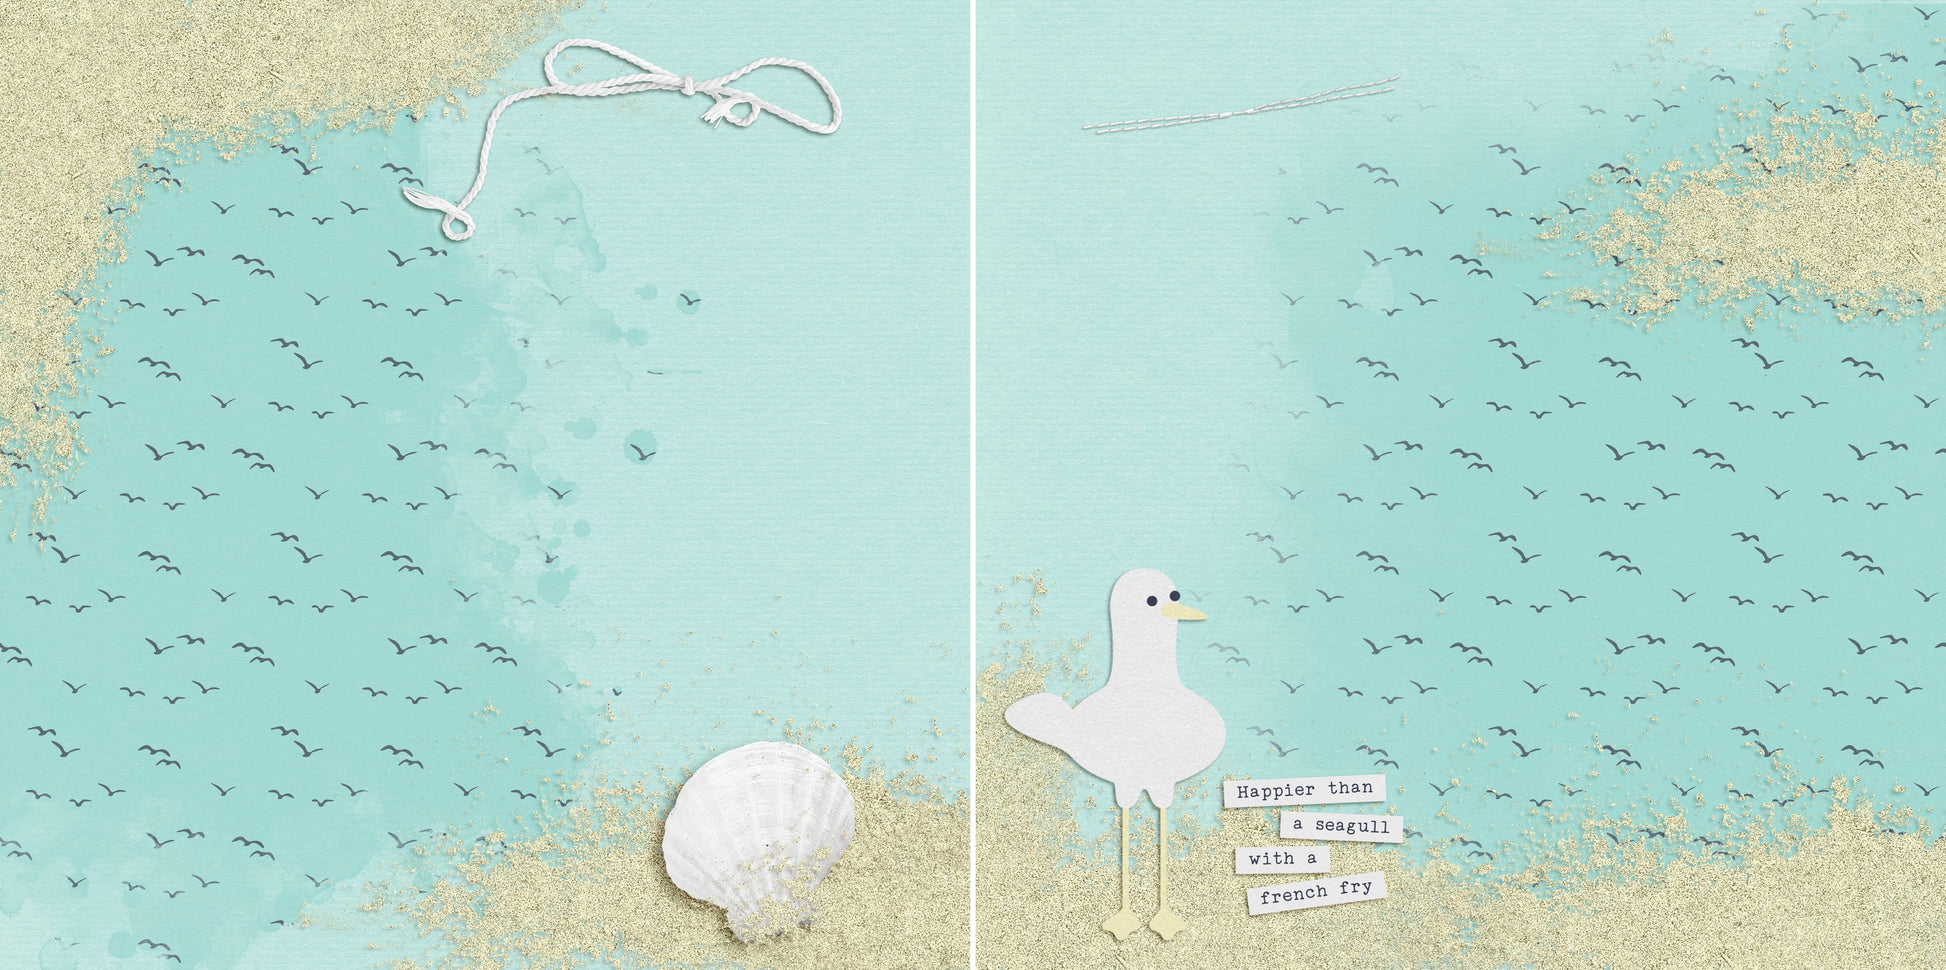 Seagull With A French Fry NPM - 5339 - EZscrapbooks Scrapbook Layouts Beach - Tropical, Vacation